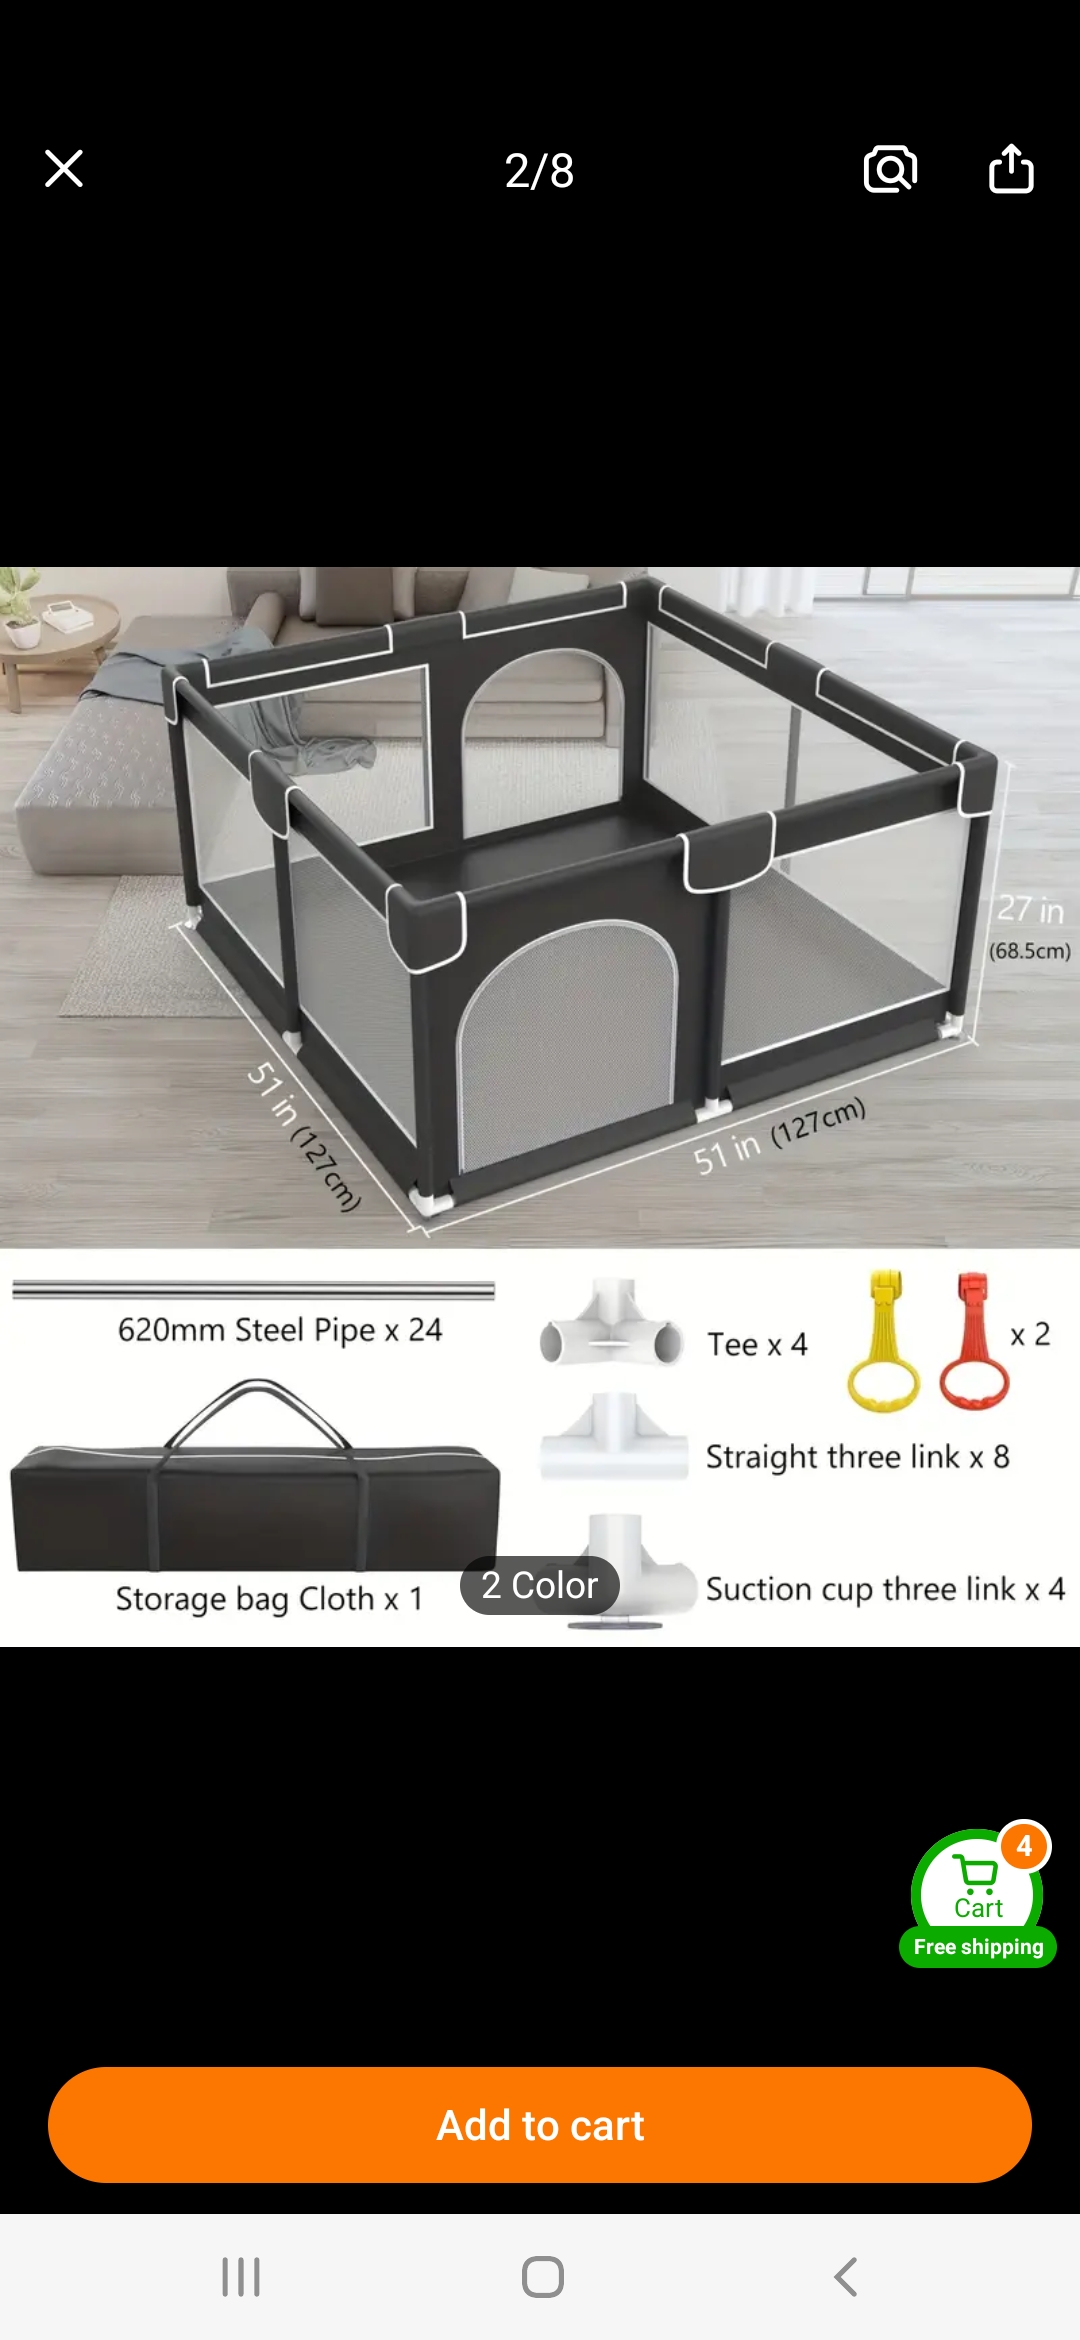 Baby private play ground  (Baby playpen)